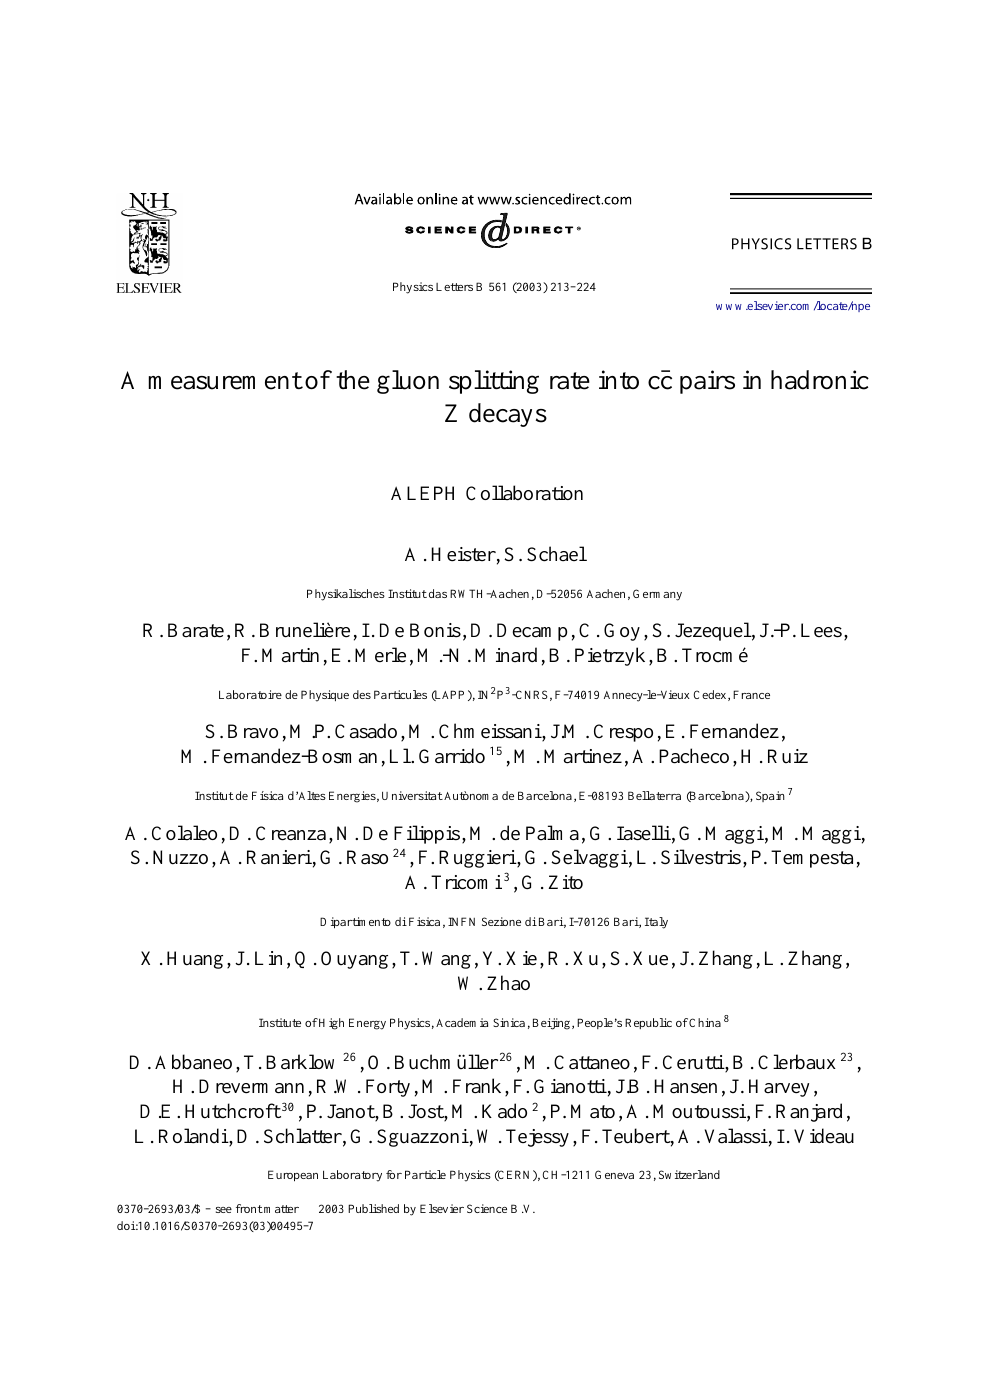 A Measurement Of The Gluon Splitting Rate Into Cc Pairs In Hadronic Z Decays Topic Of Research Paper In Physical Sciences Download Scholarly Article Pdf And Read For Free On Cyberleninka